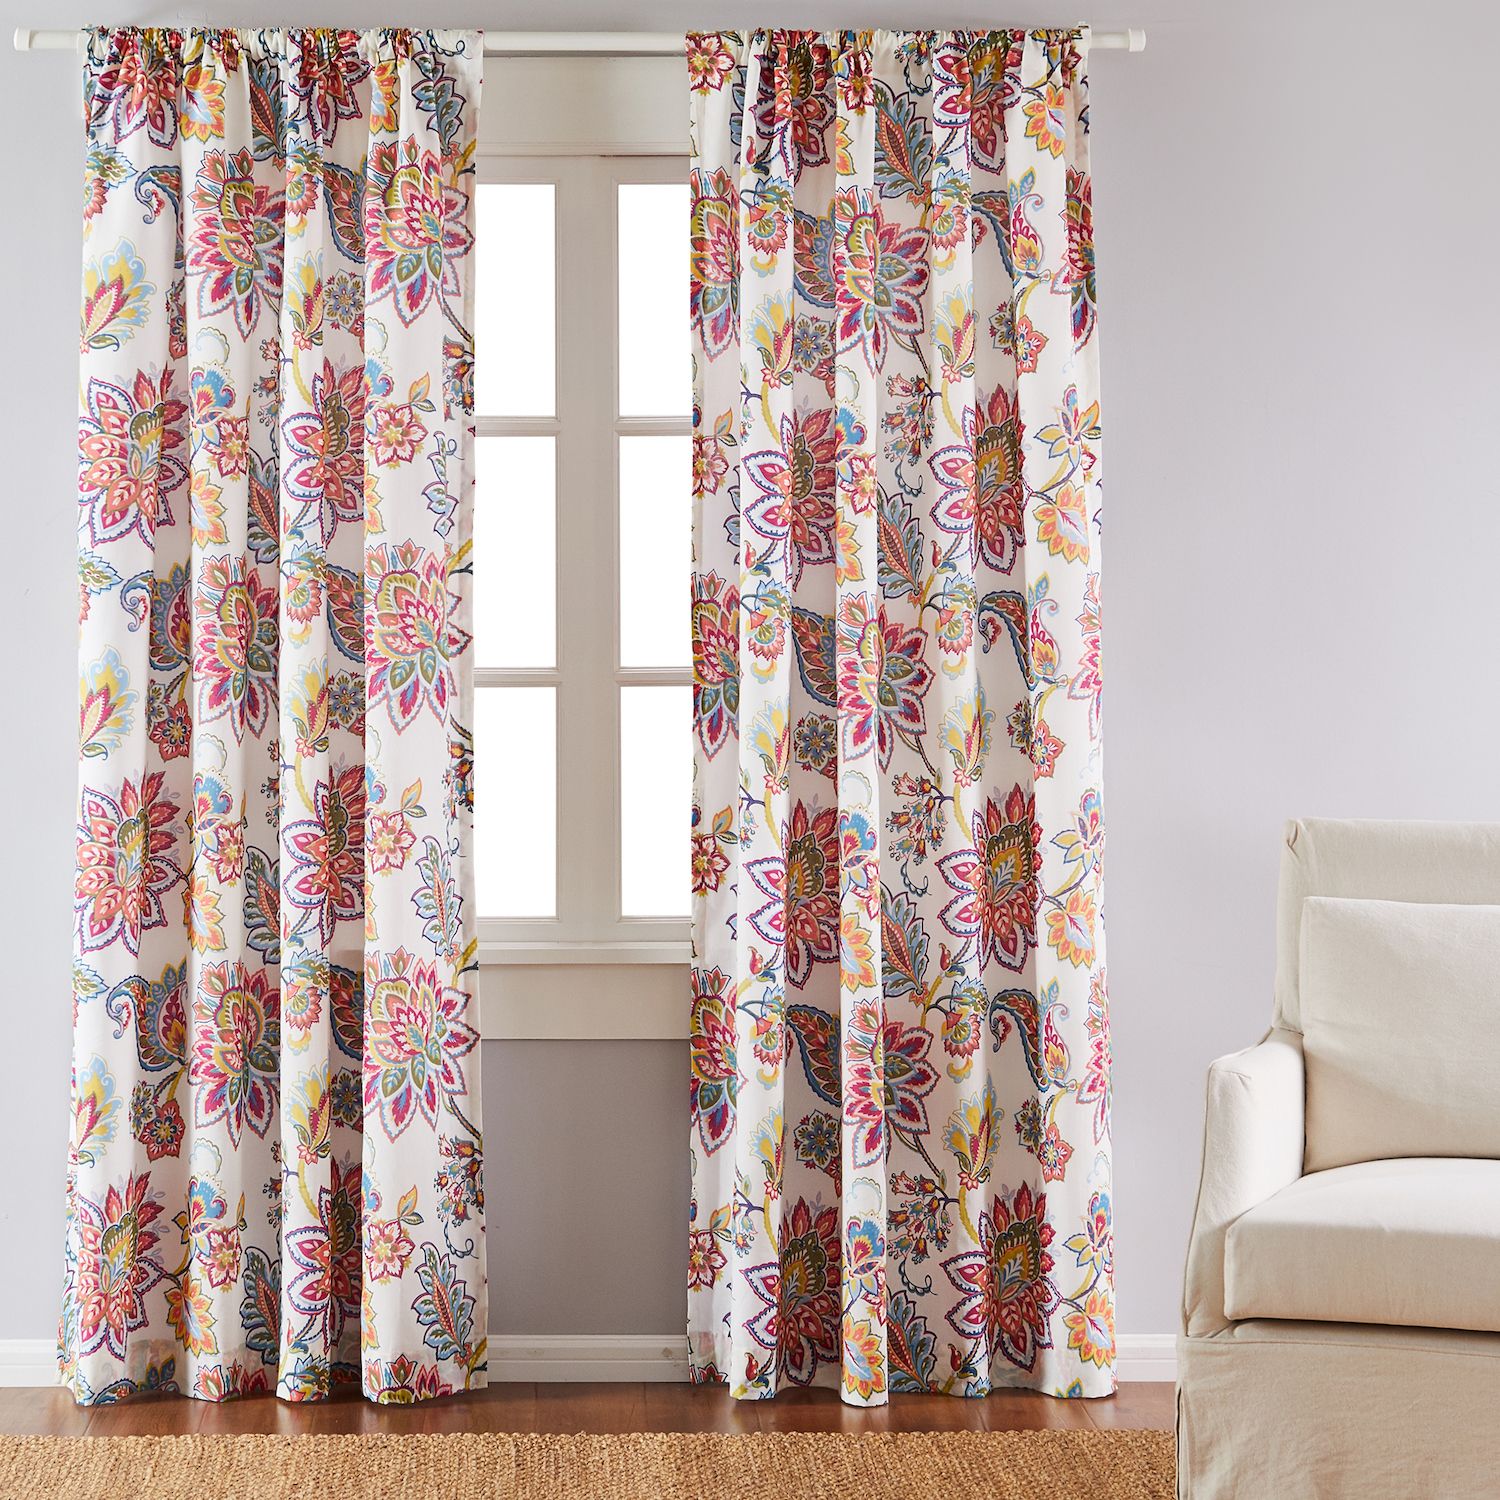 Image for Levtex Home Palladium 2-pack Window Curtain Set at Kohl's.